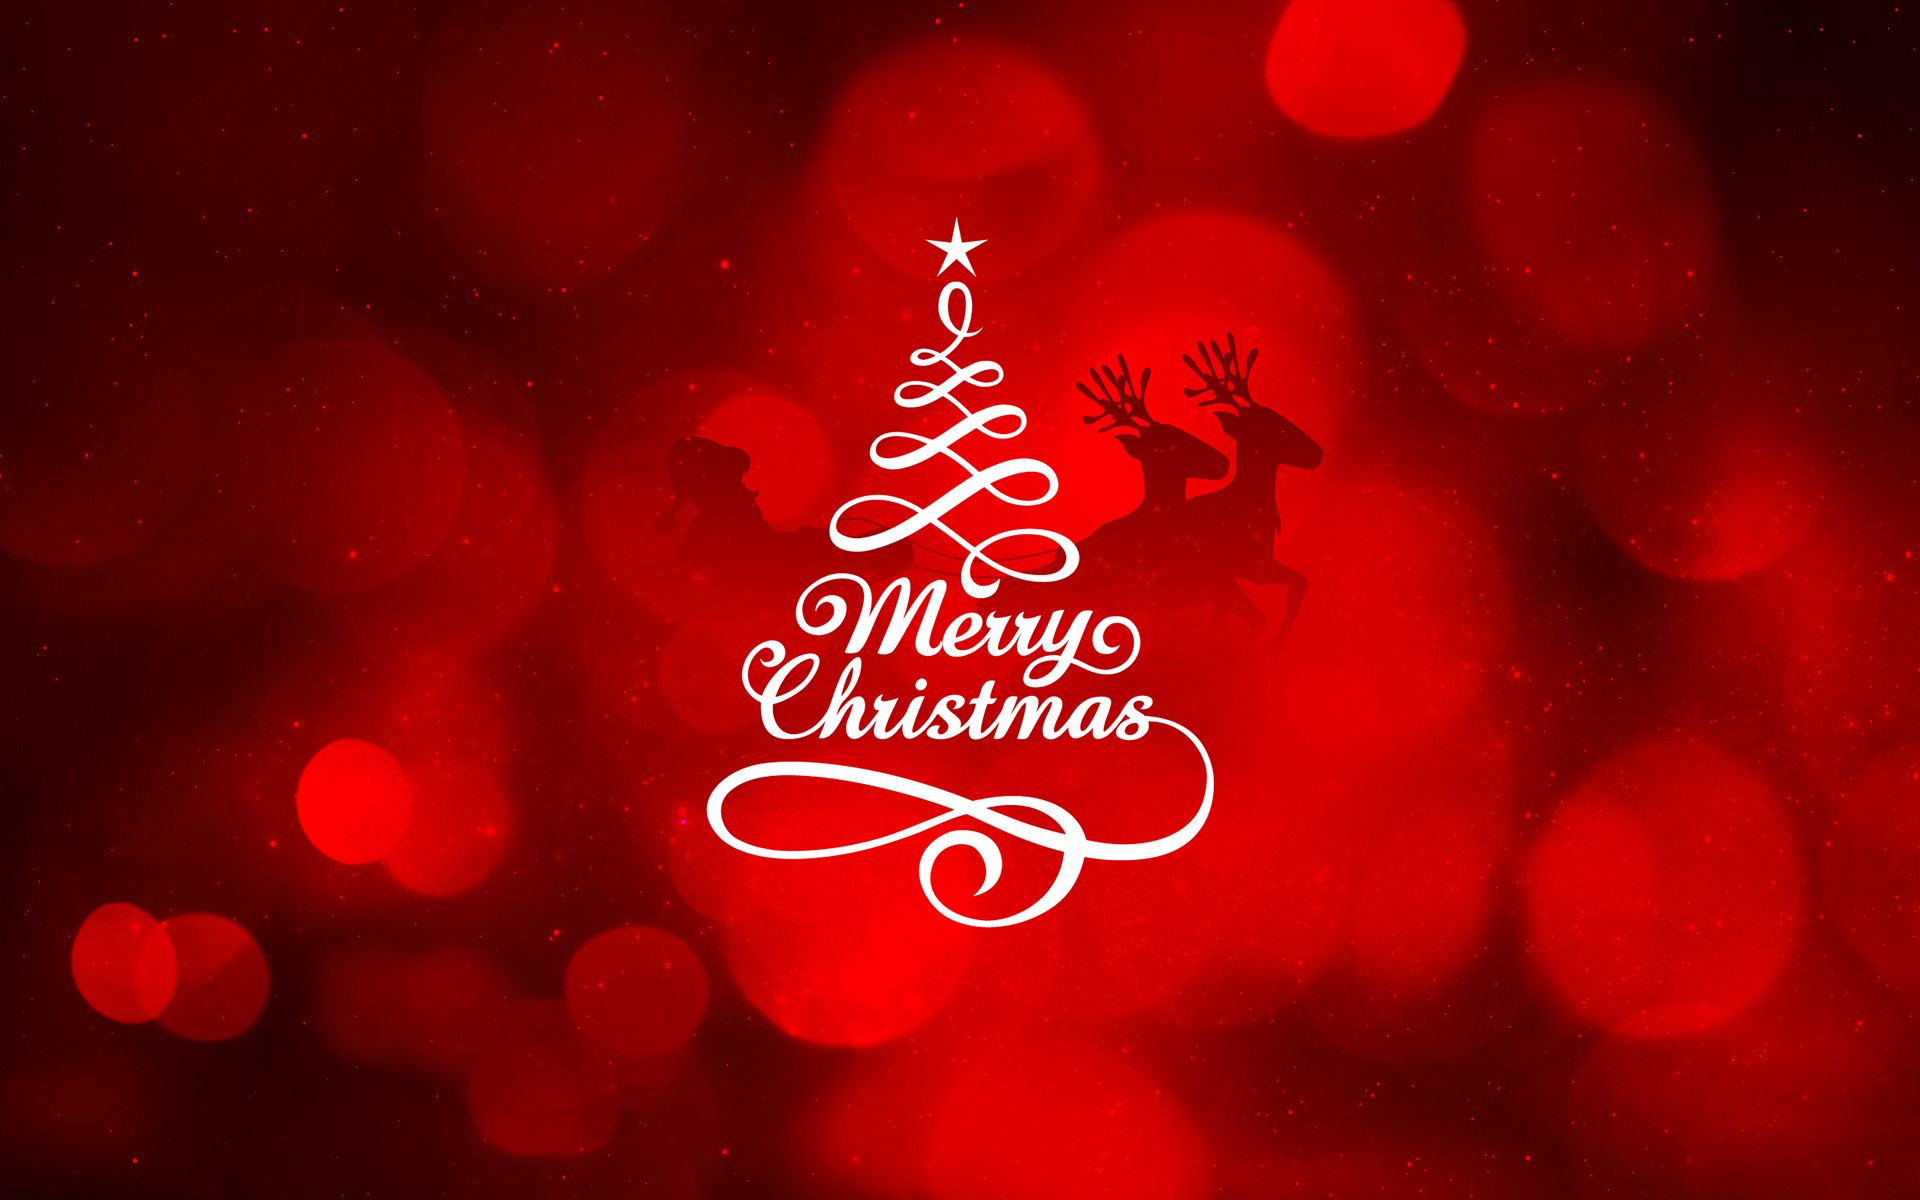 Christmas Merry Quotes Wallpapers Attachment 40 - HD Wallpaper Site